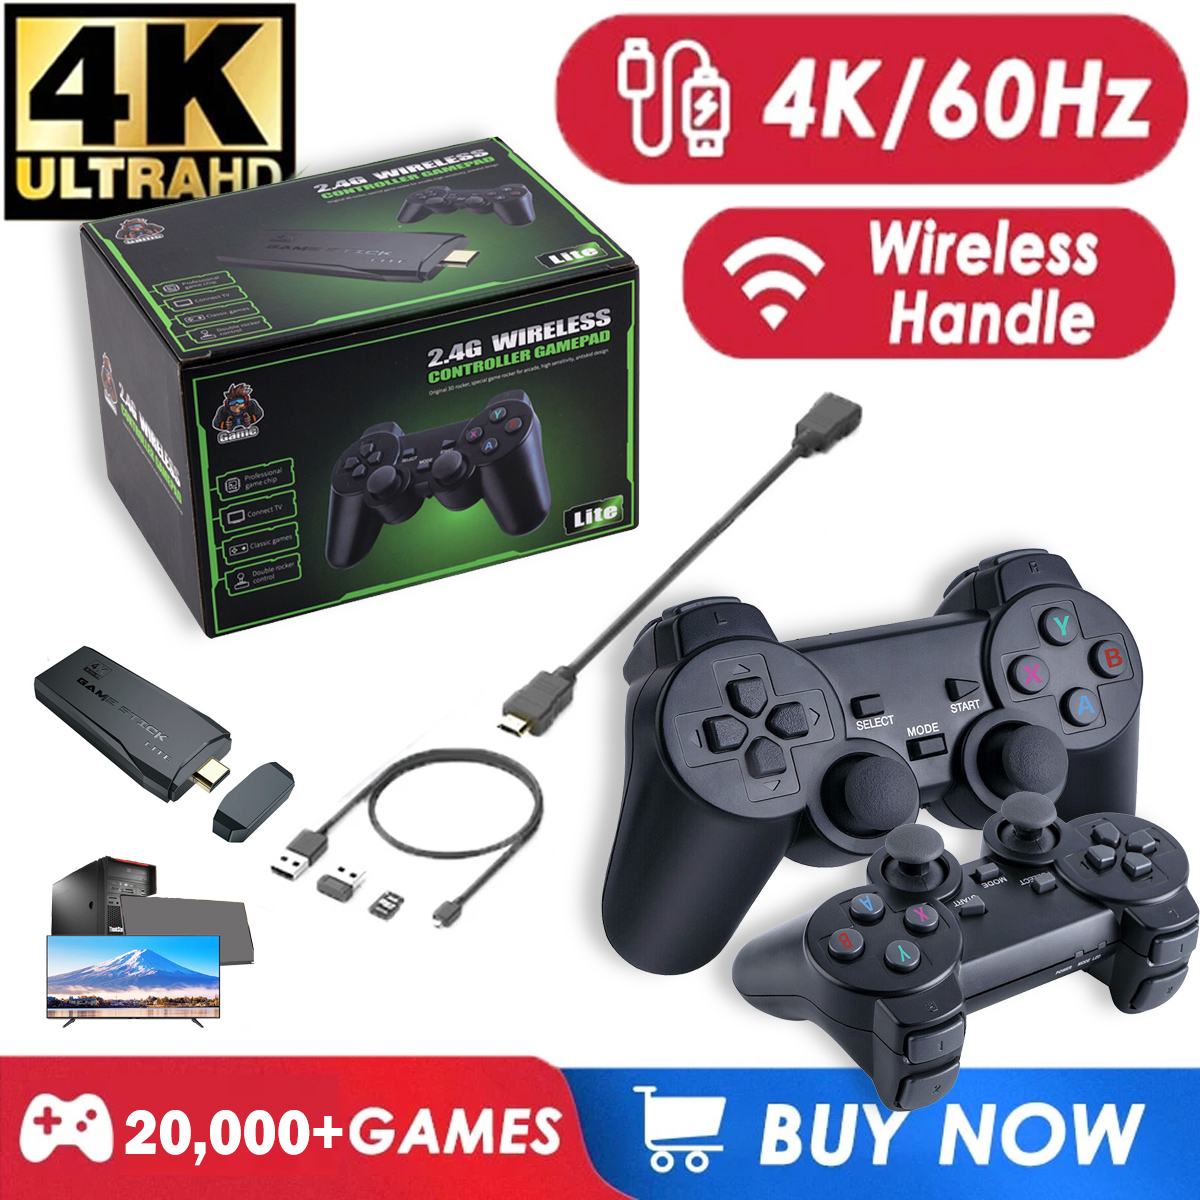 GAME Stick GD30 HDMI Video Game Built-in 35K+ Classic Games 4k